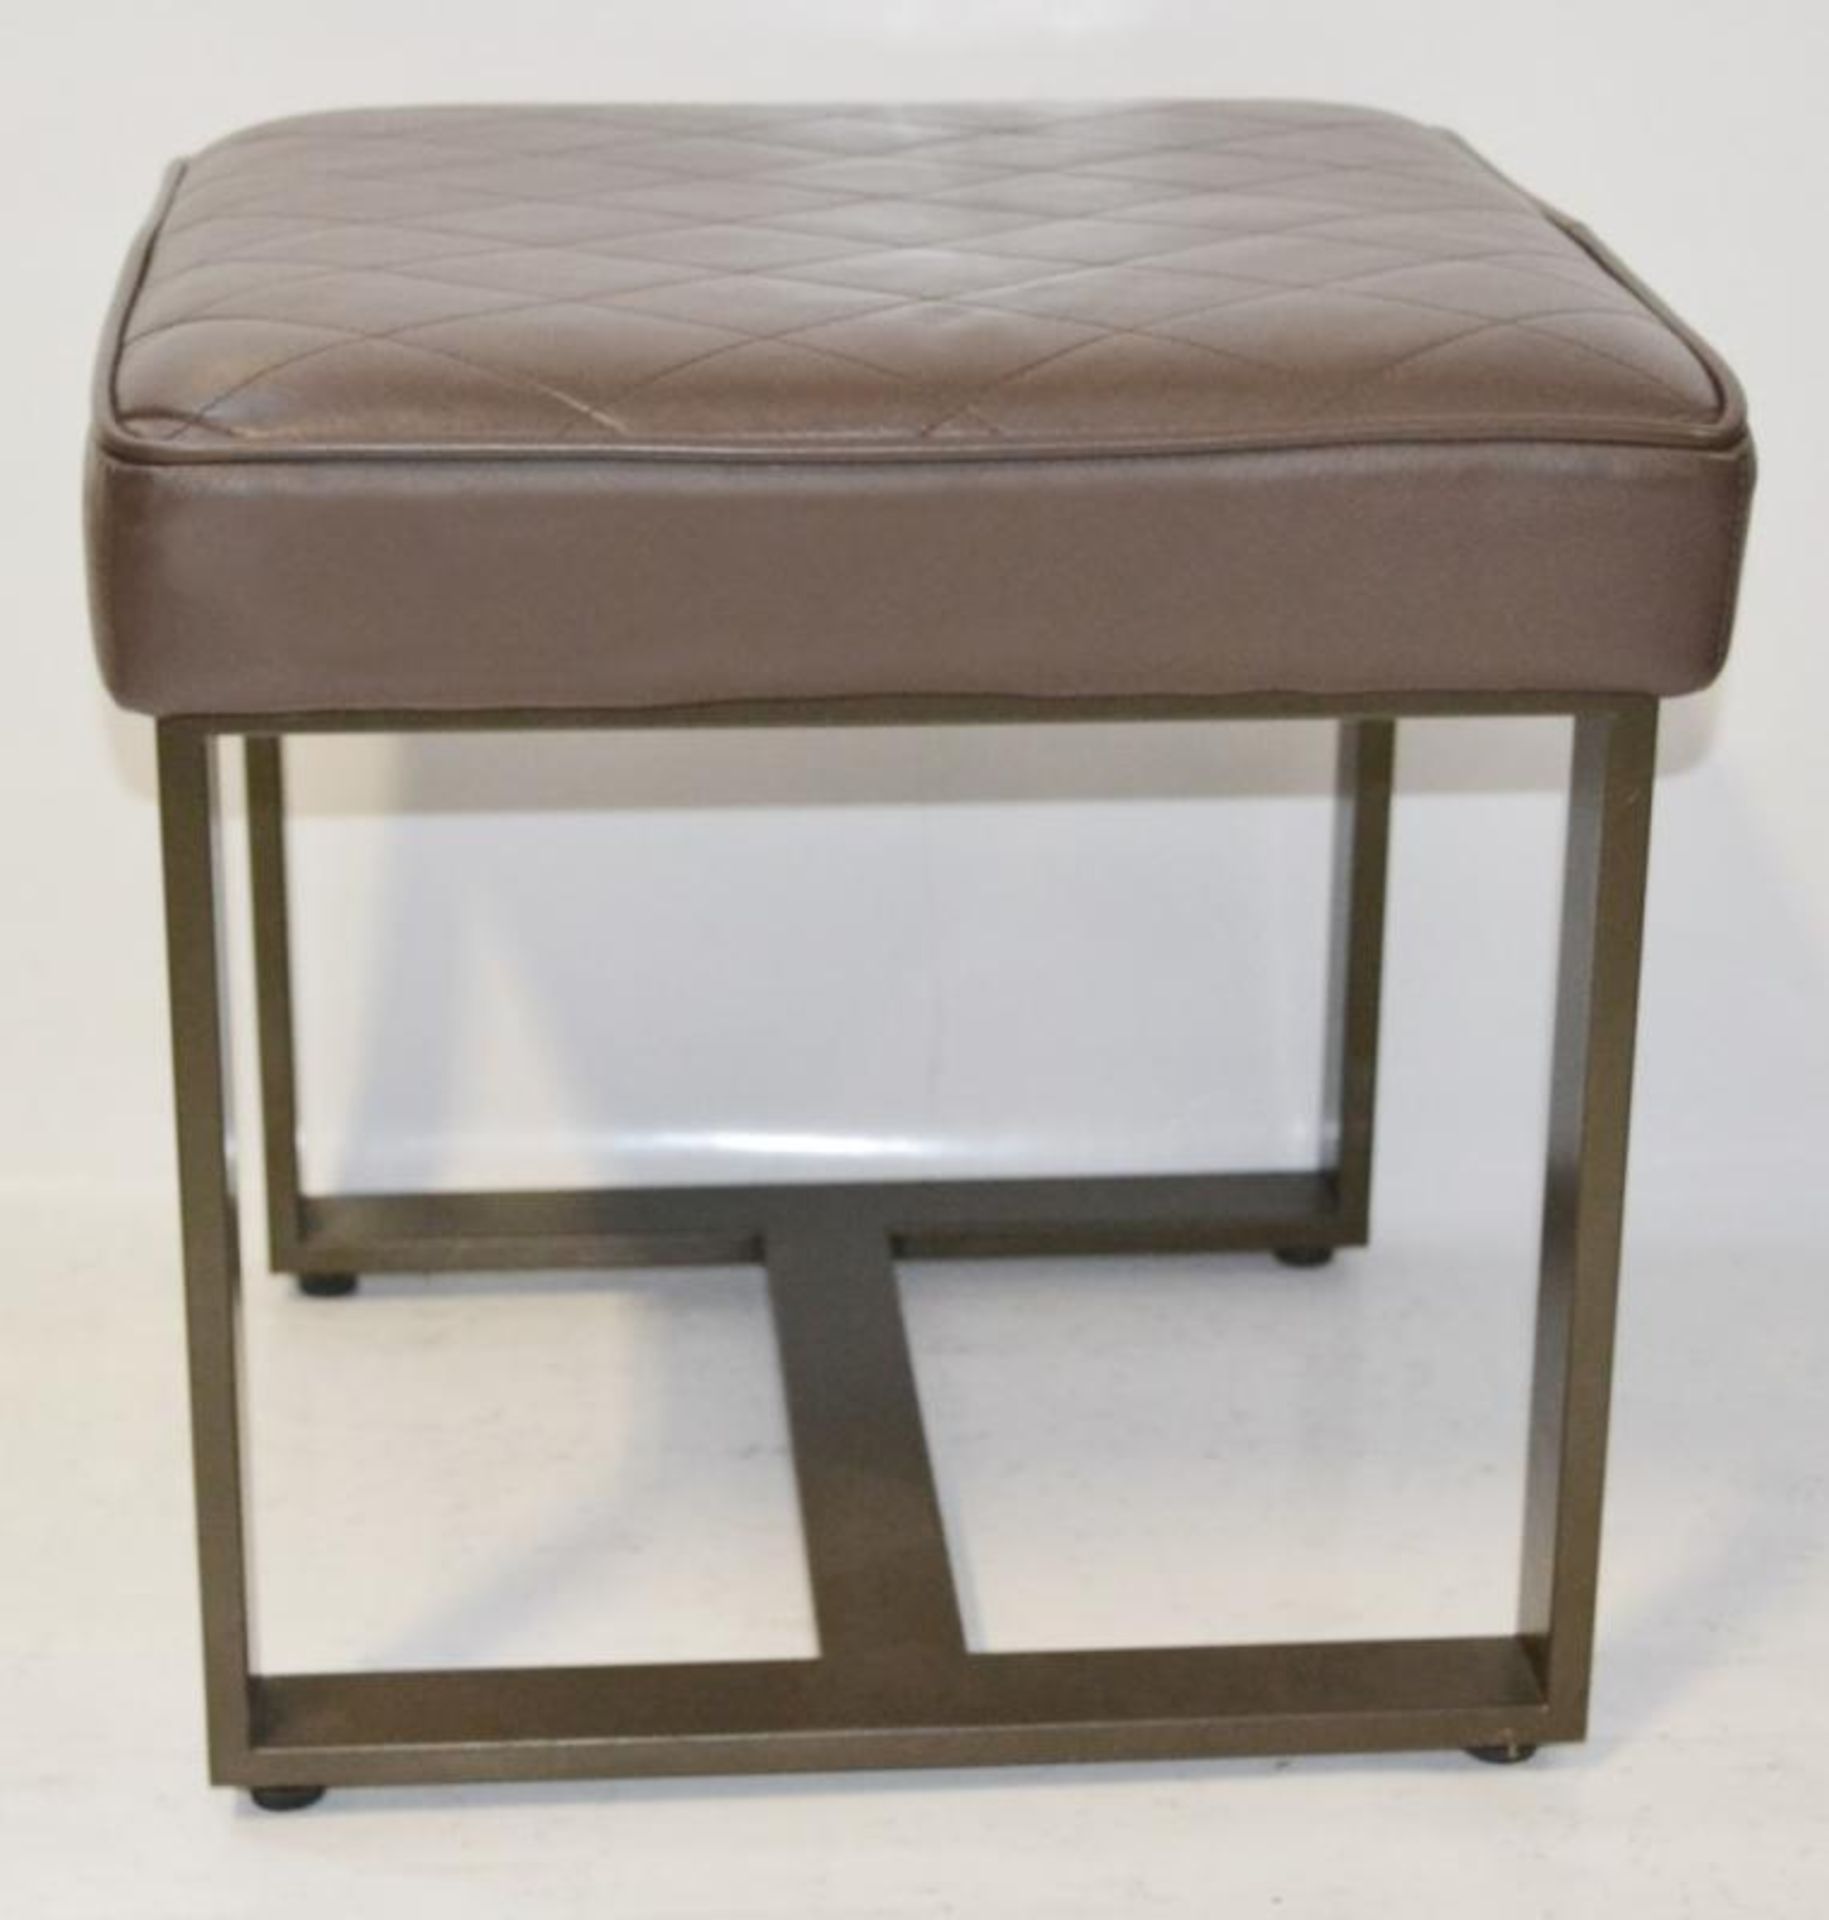 8 x Contemporary Seat Stools With Brown Faux Leather Cushioned Seat Pads - Recently Removed From - Image 5 of 6